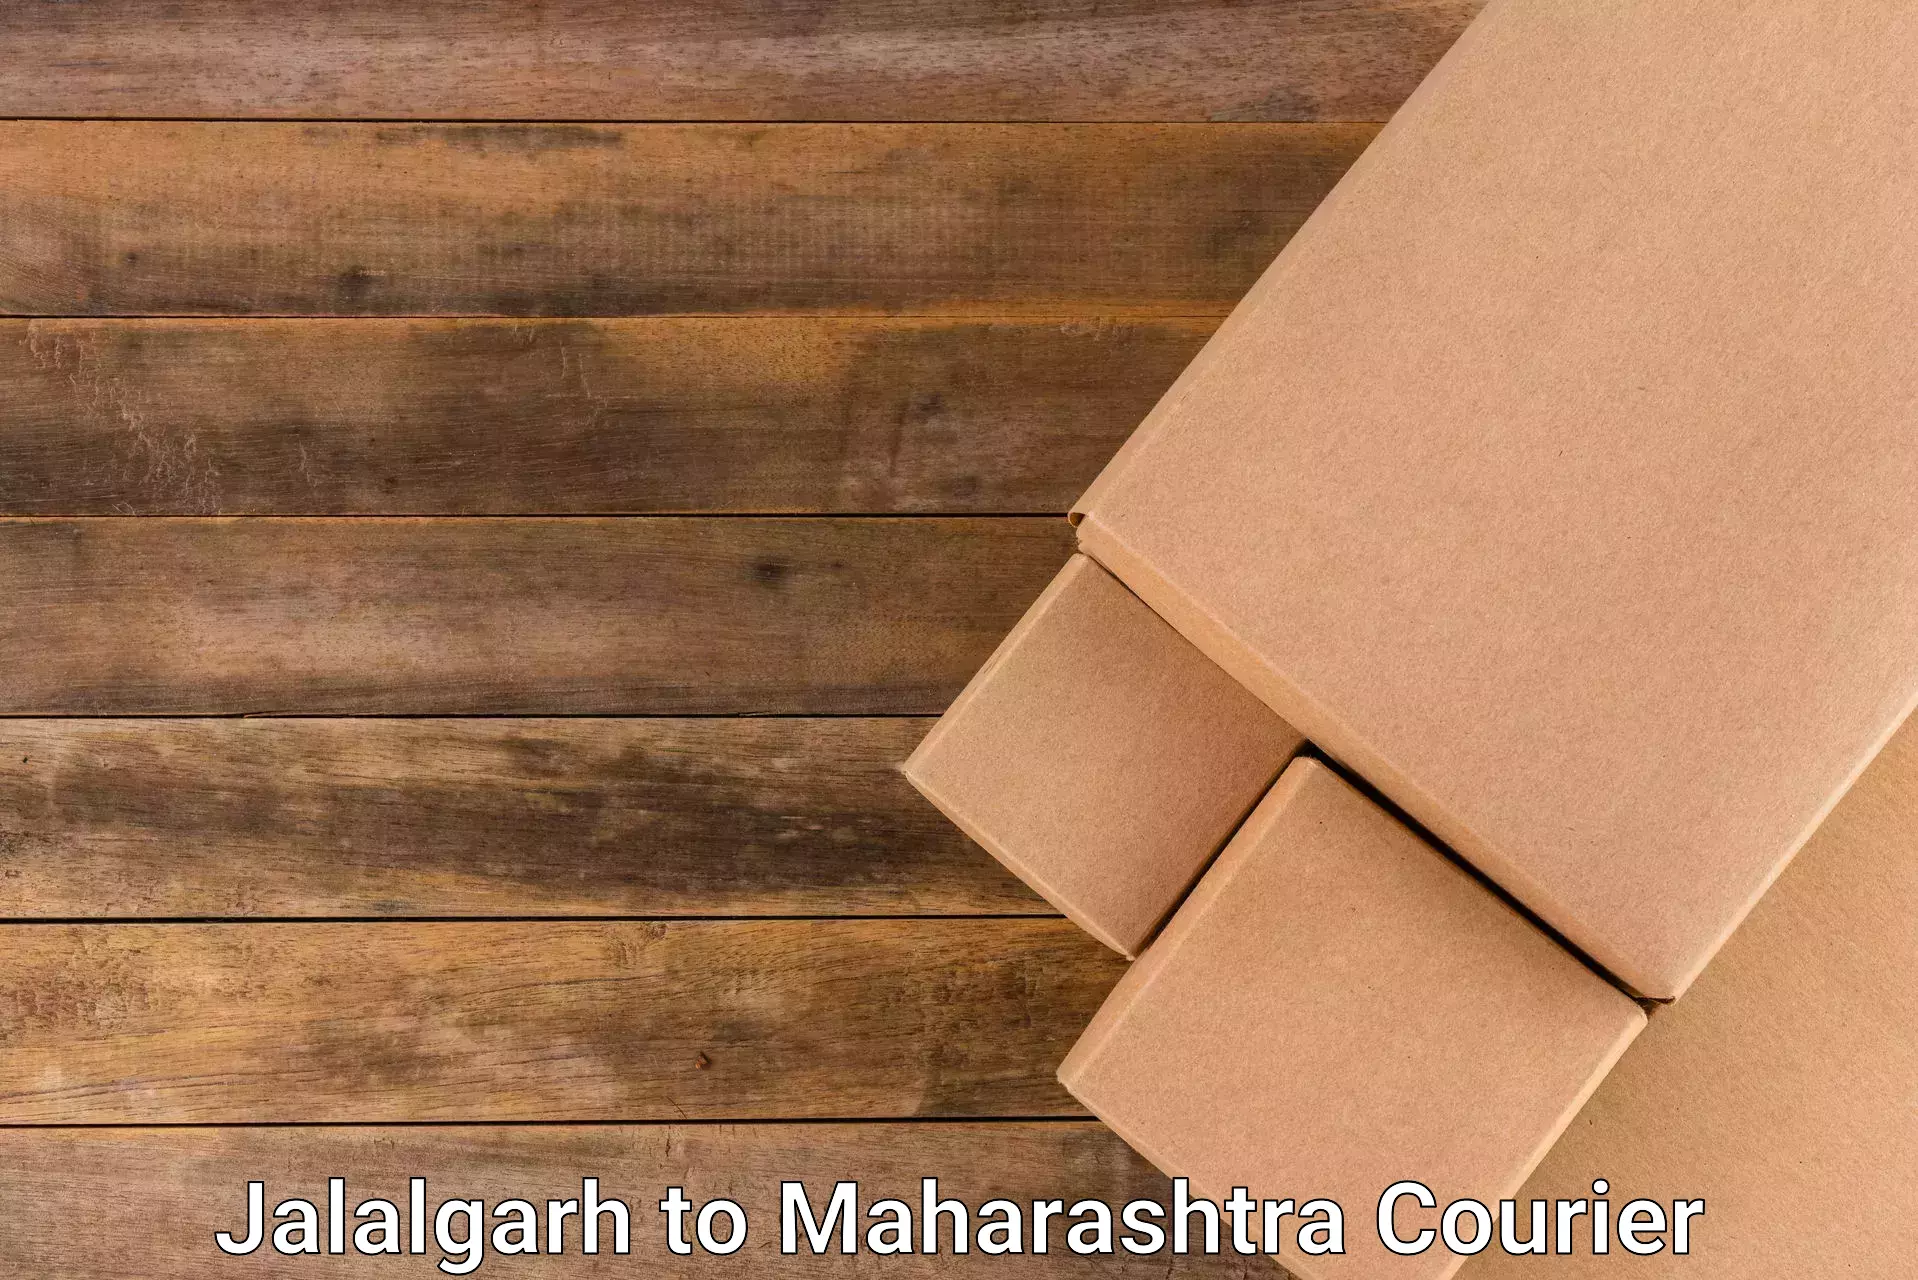 On-call courier service Jalalgarh to Chandwad